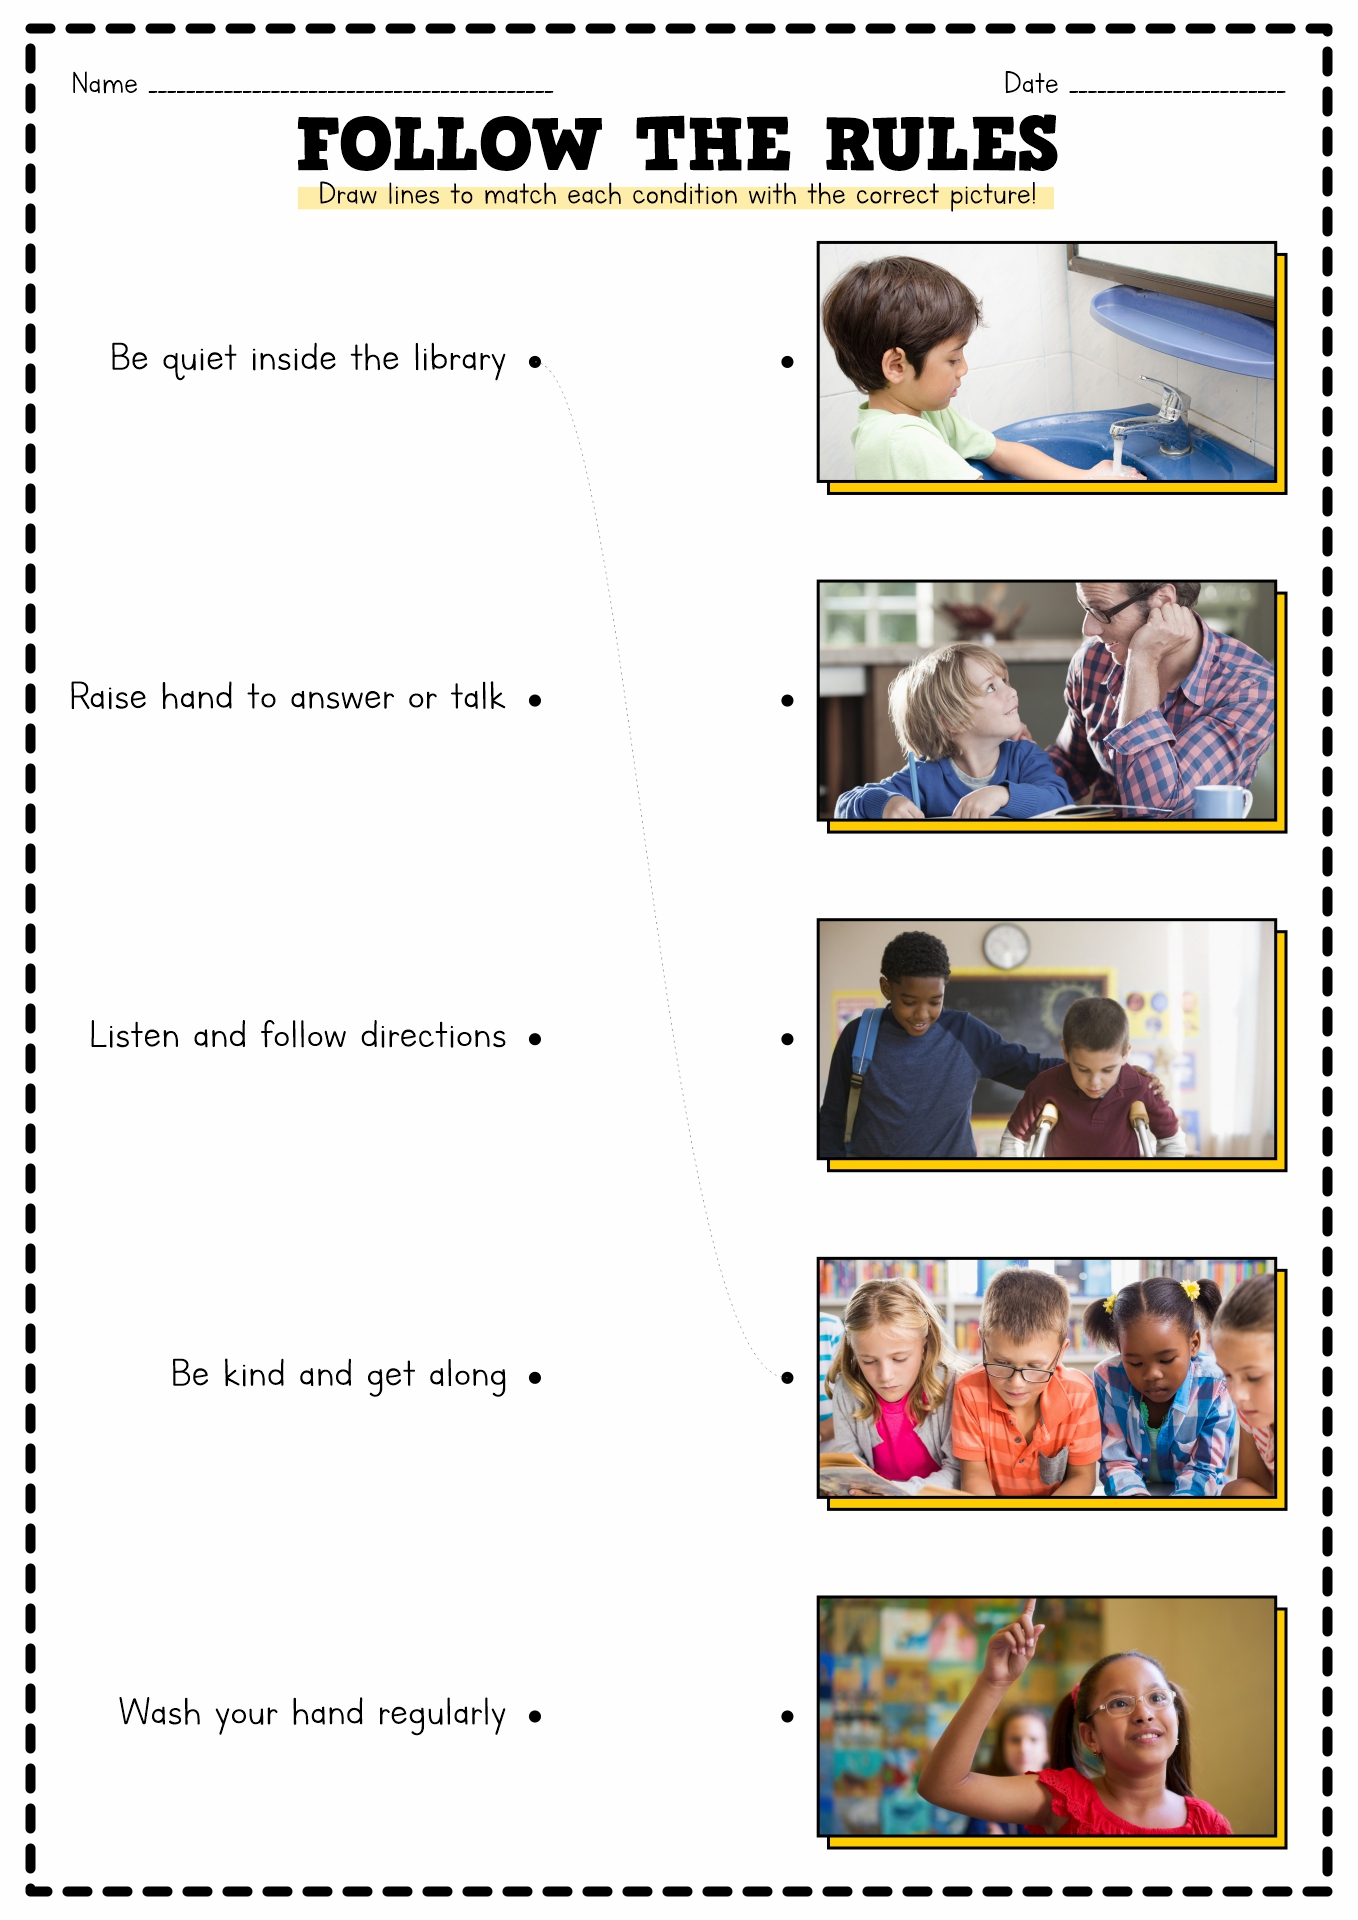 Following Rules Worksheets Image